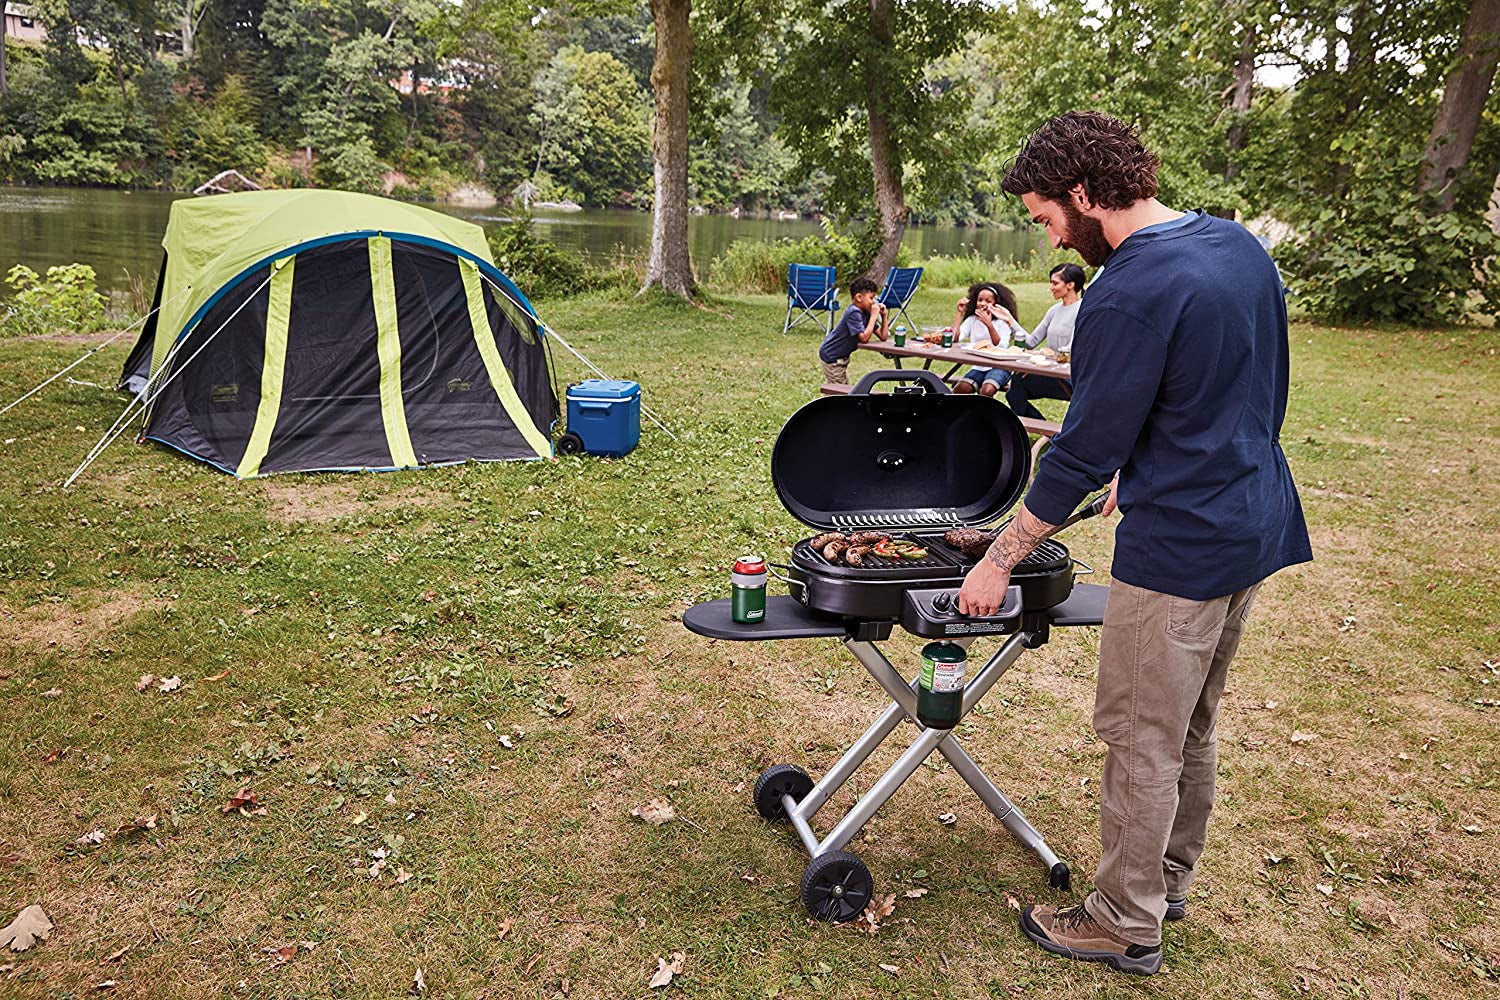 Roadtrip 285 Portable Stand-Up Propane Grill, Gas Grill with 3 Adjustable Burners & Instastart Push-Button Ignition; Great for Camping, Tailgating, BBQ, Parties, Backyard, Patio & More